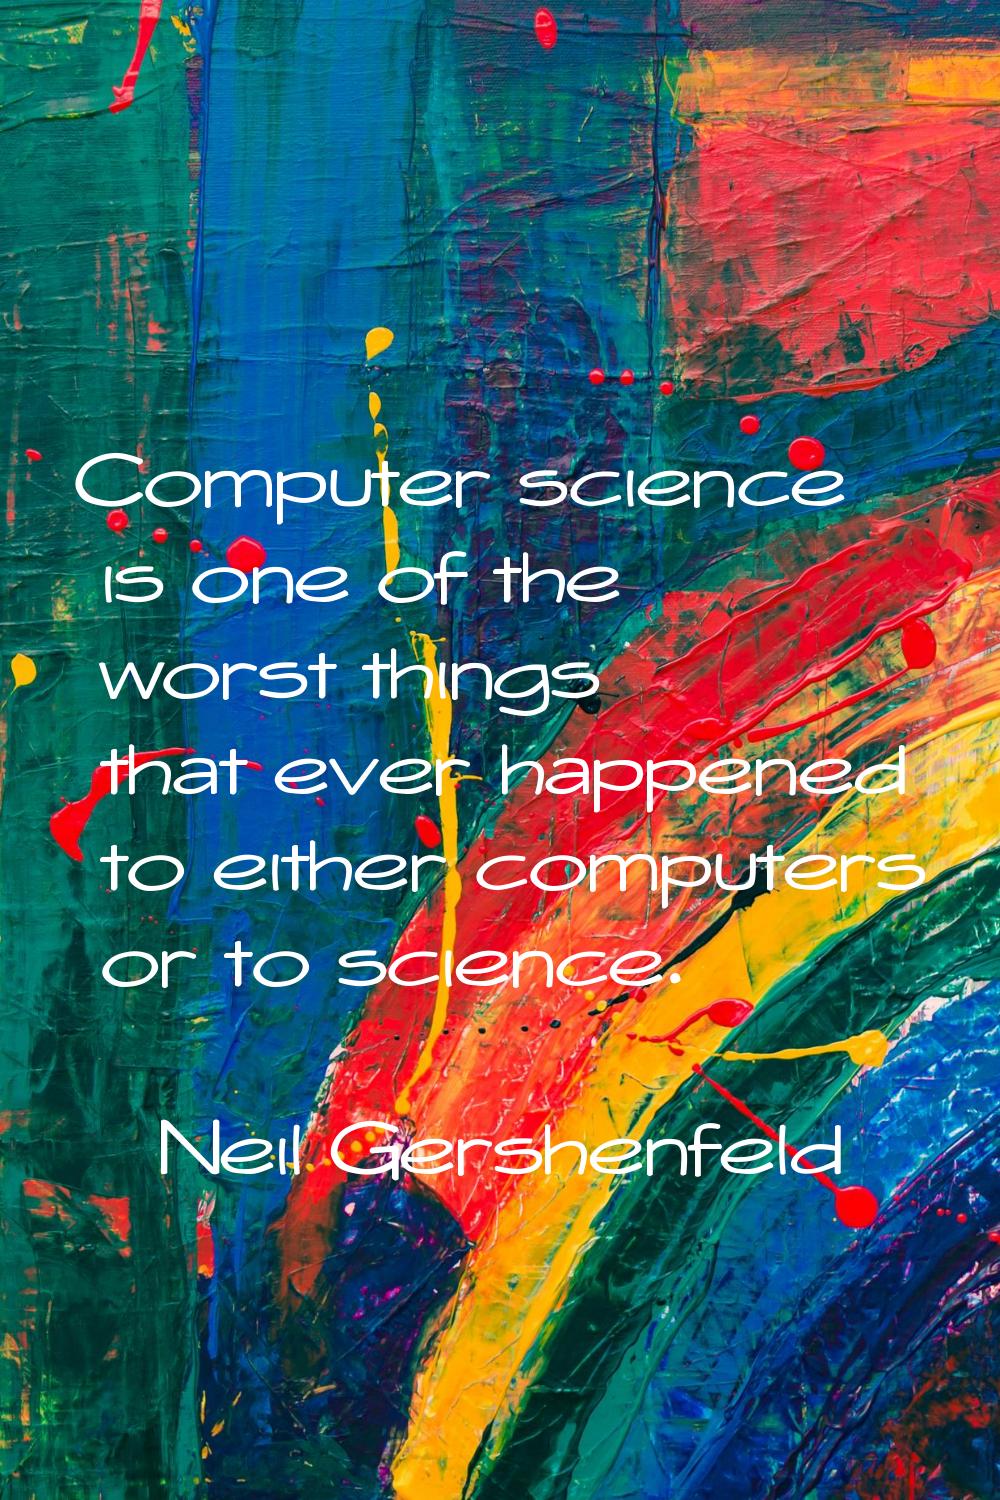 Computer science is one of the worst things that ever happened to either computers or to science.